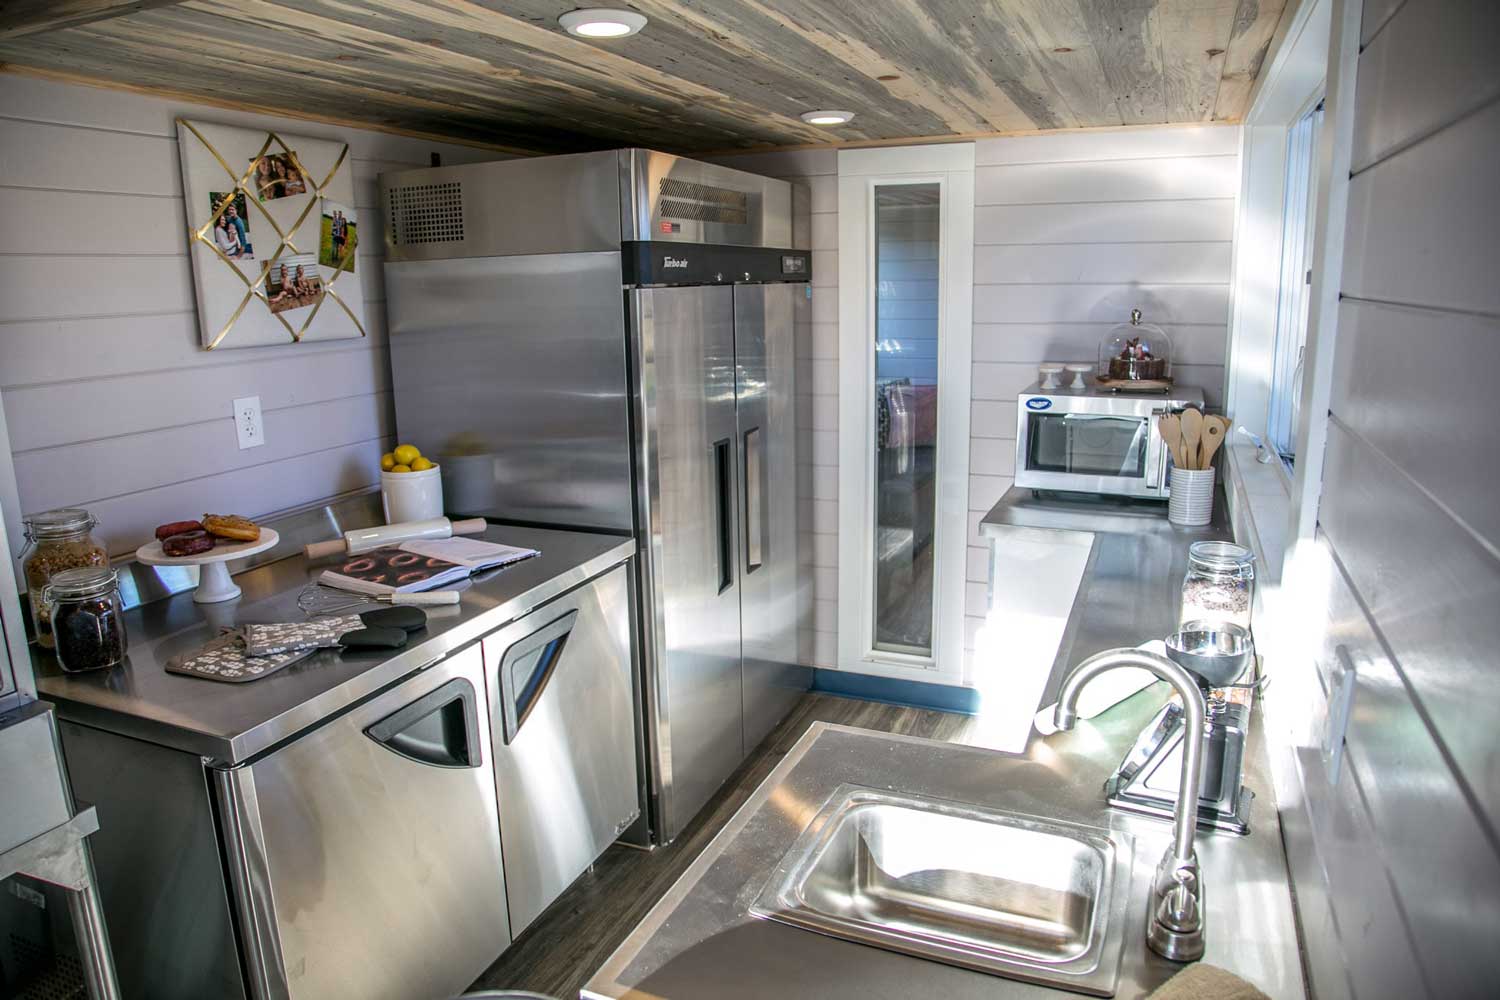 Commercial kitchen details in the Kentucky Donut Shop custom commercial tiny home